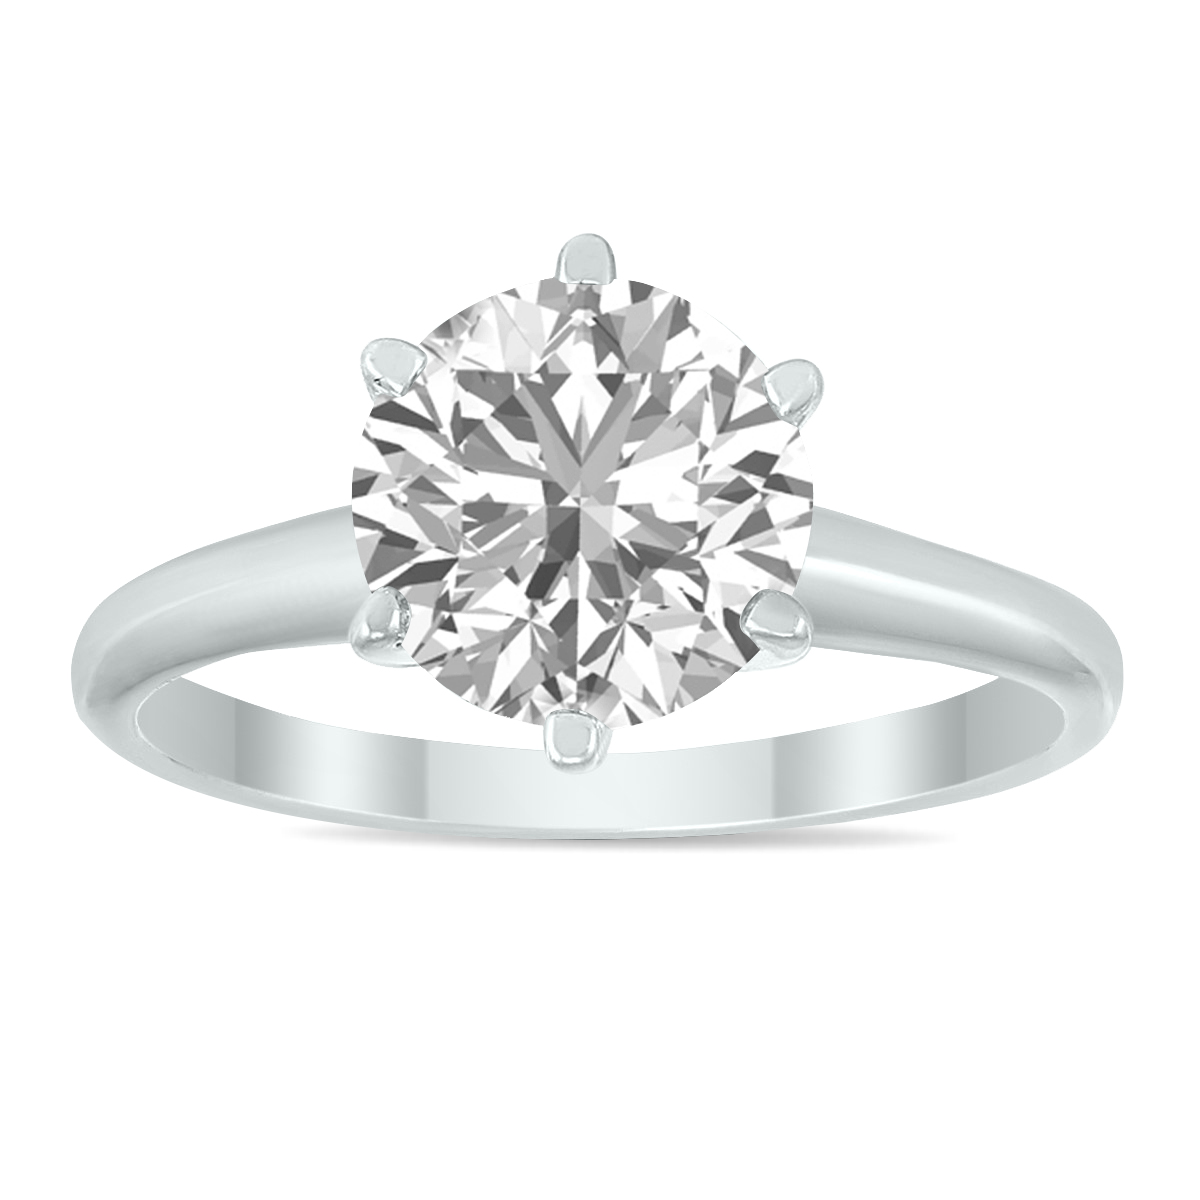 Image of IGI Certified Lab Grown 1 1/4 Carat Diamond Solitaire Ring in 14K White Gold (I Color SI2 Clarity)